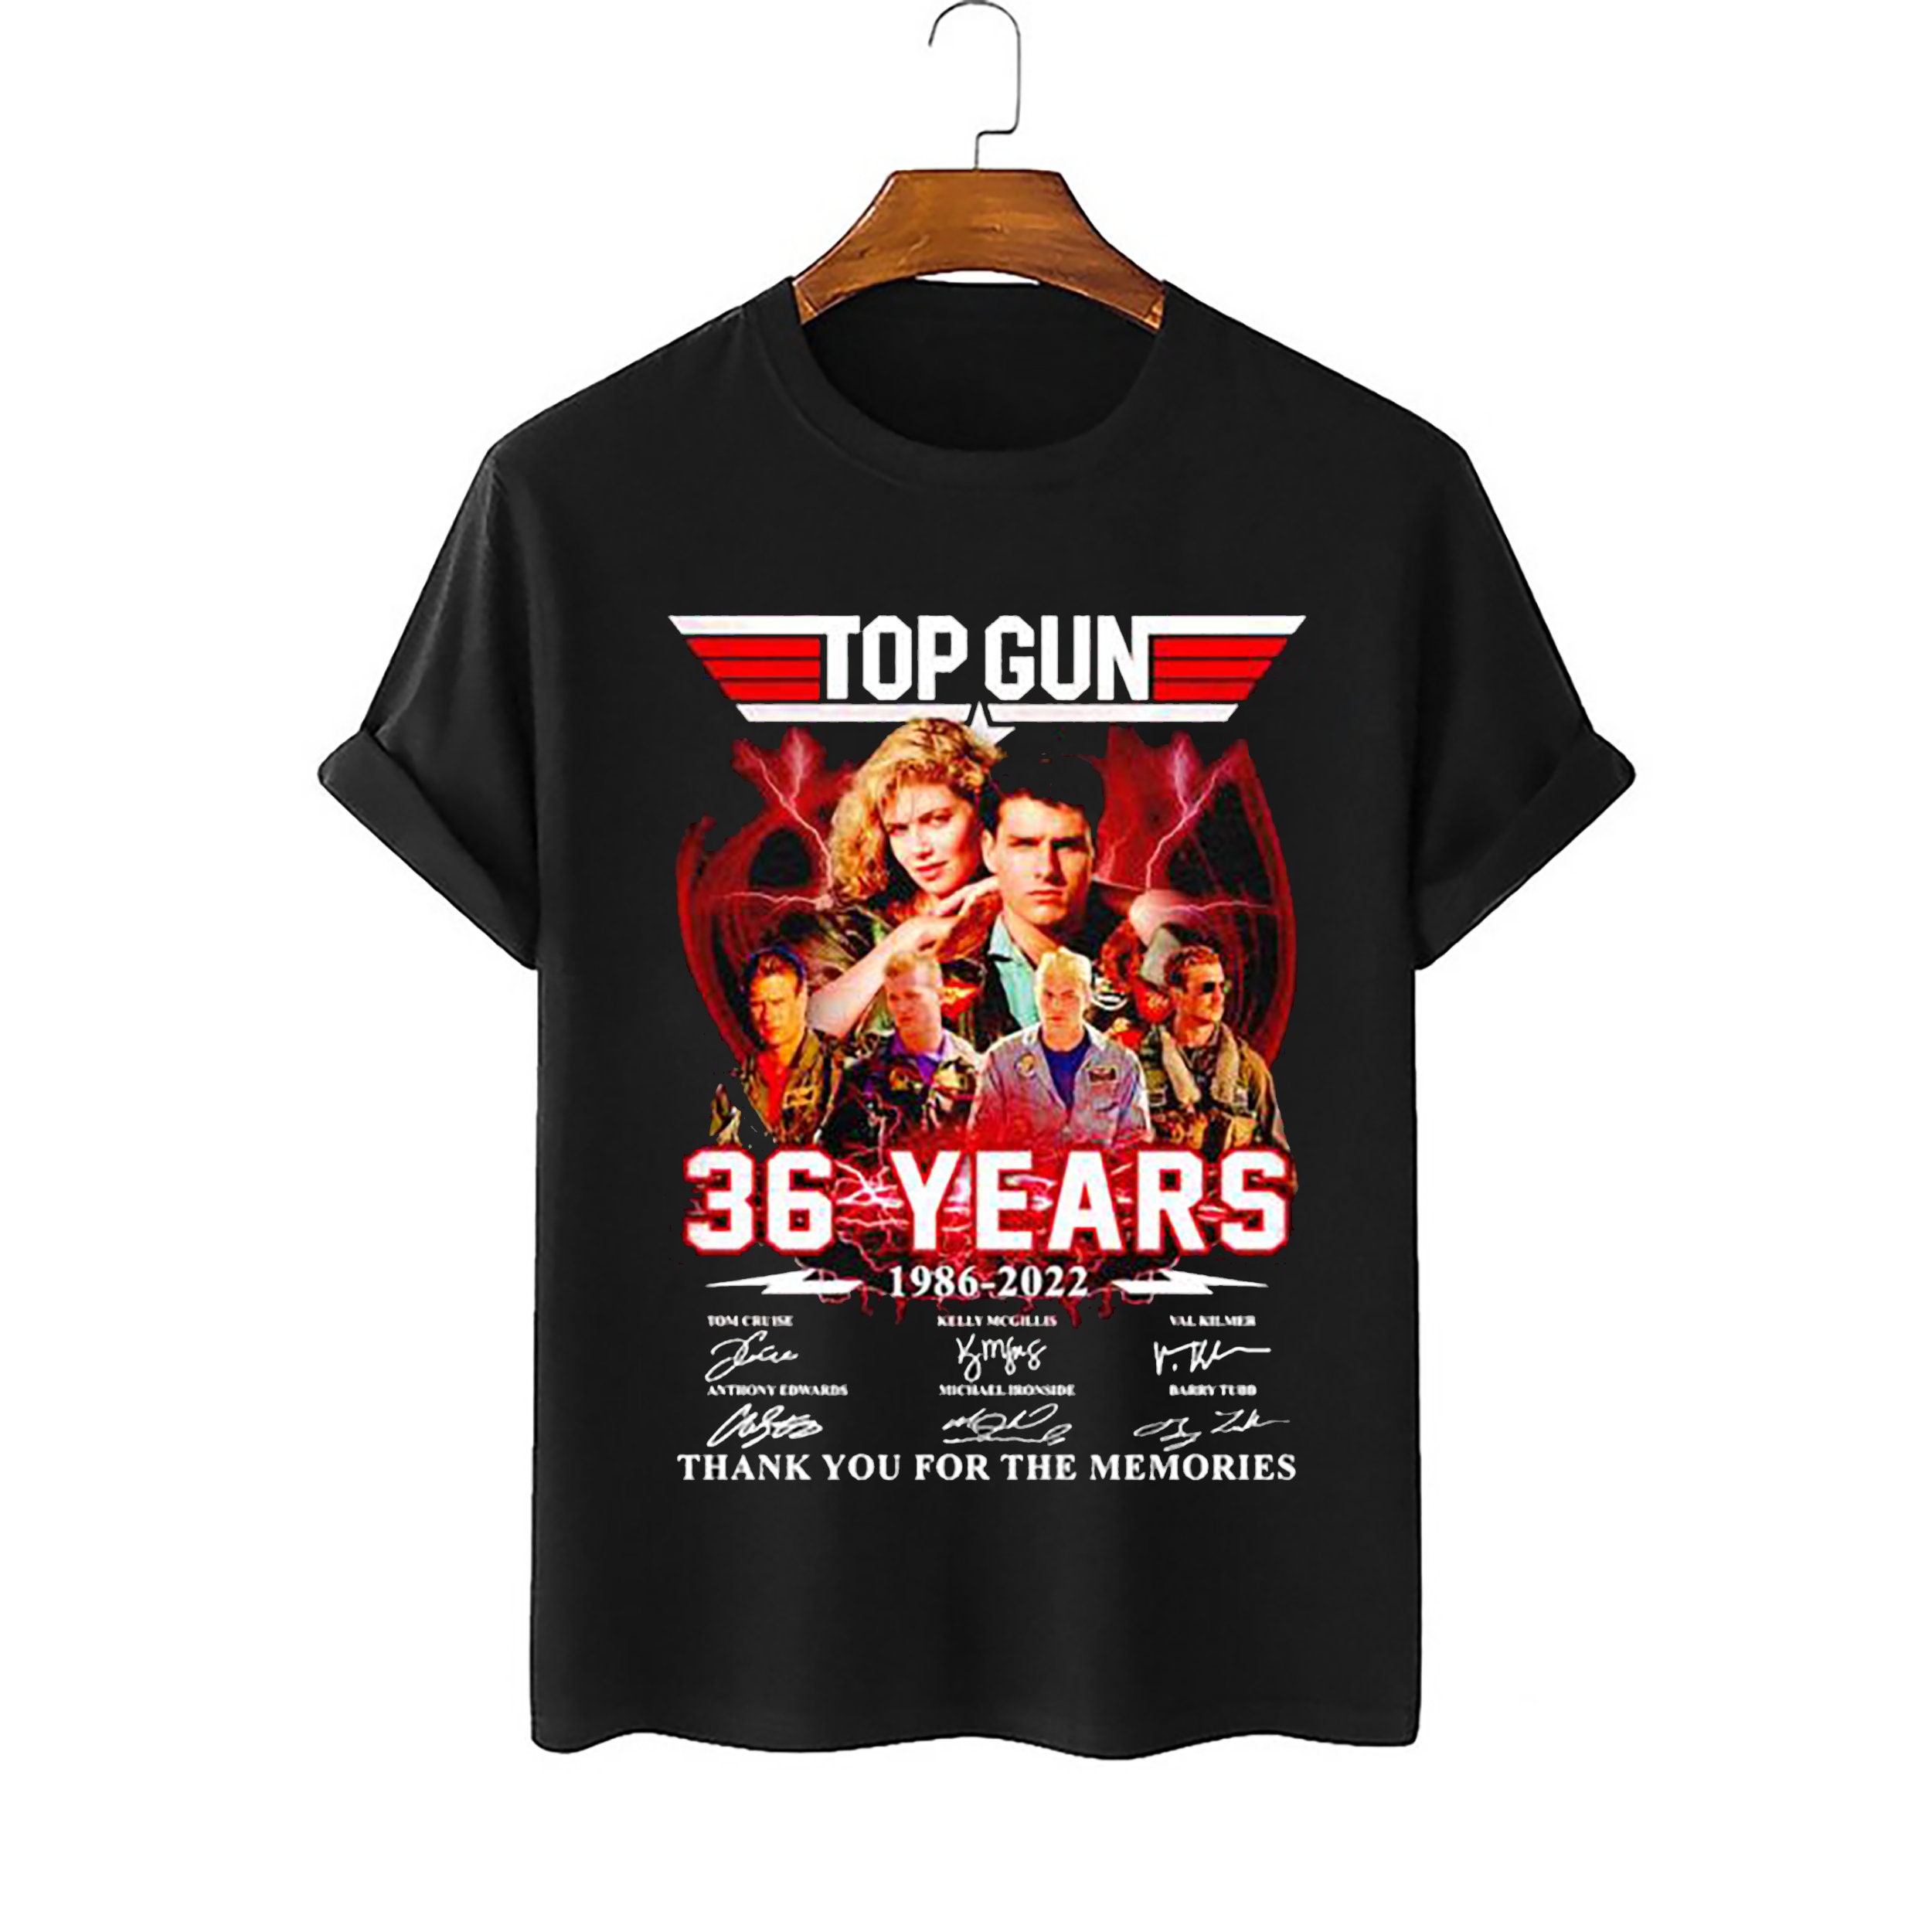 Top Gun 36 Years 1986 2022 Thank You For The Memories Signatures Unisex T-Shirt